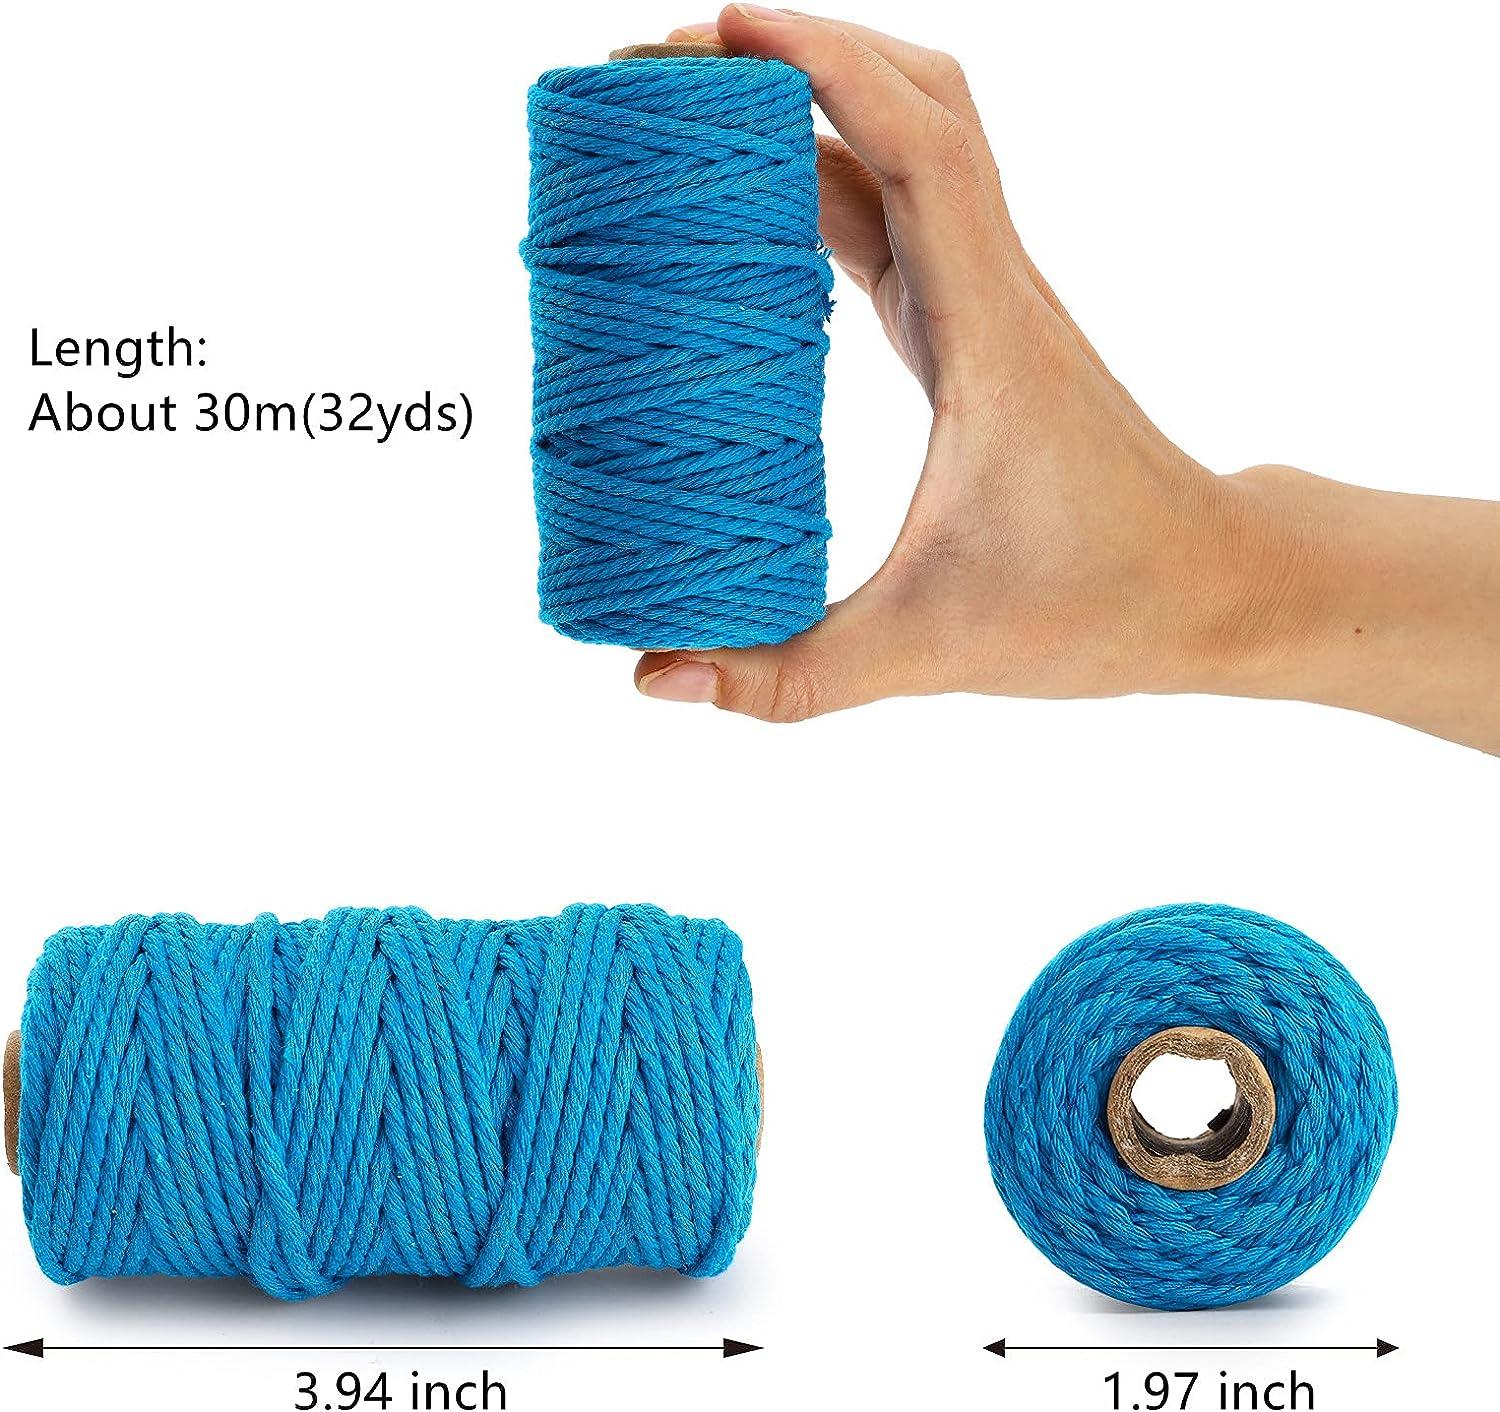 ZEAYEA 15 Rolls Macrame Cord 3mm x 480 Yards Natural Cotton Macrame Rope  4-Strand Twisted Soft Cotton Twine String Cord for Artworks Wall Hanging  Plant Hangers Crafts Knitting 15 Colors